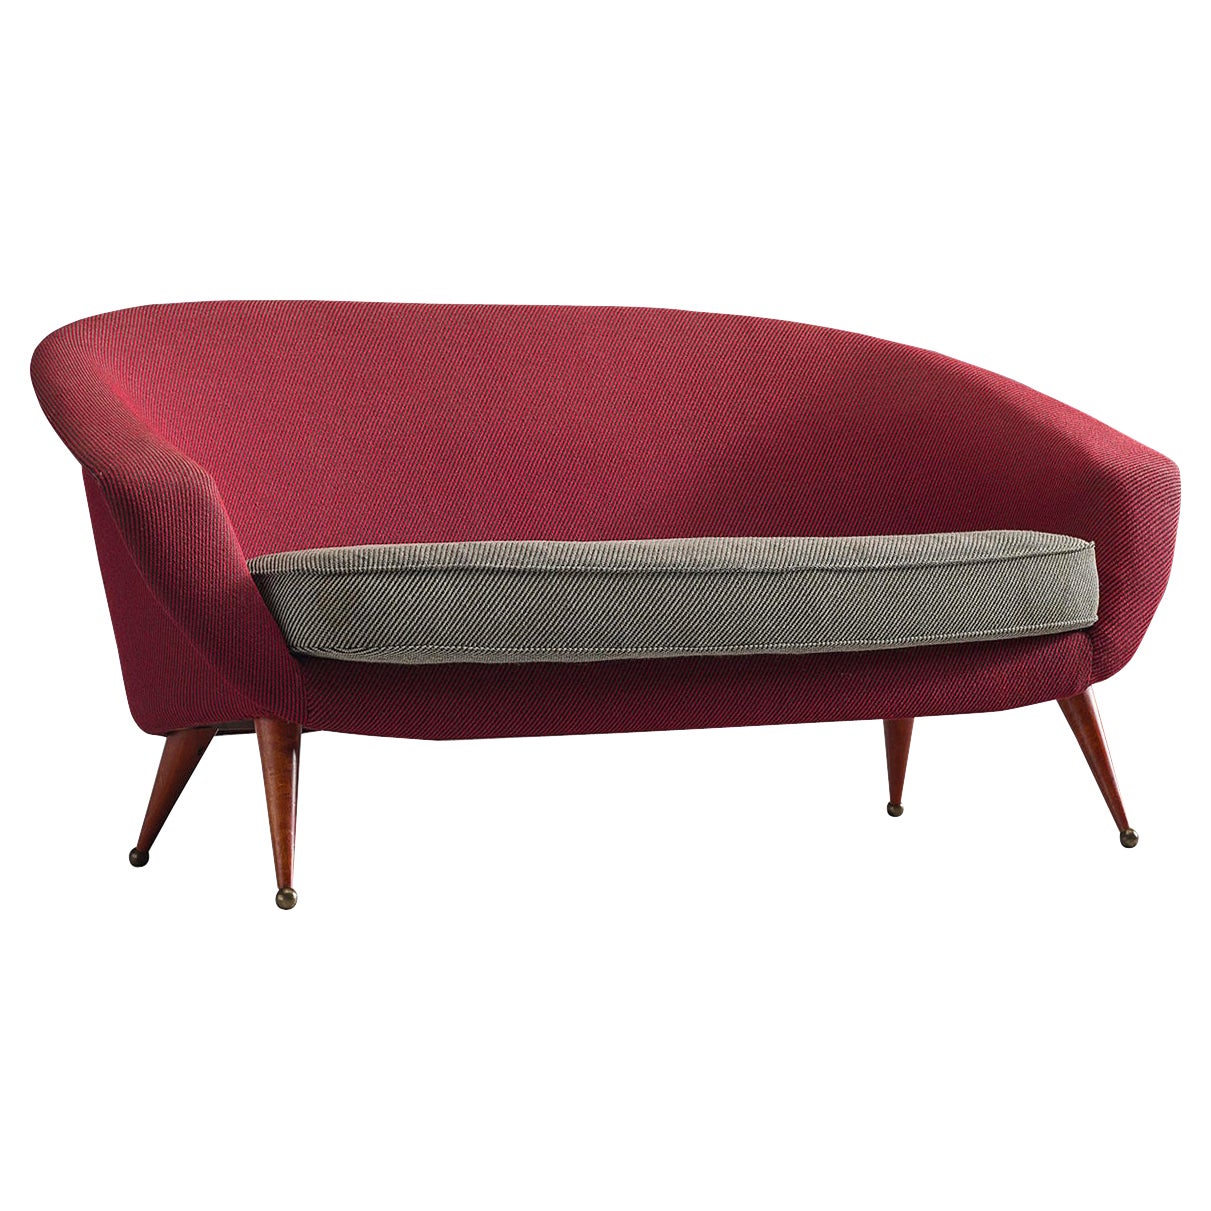 Folke Jansson 'Tellus' Sofa in Red Grey Upholstery For Sale